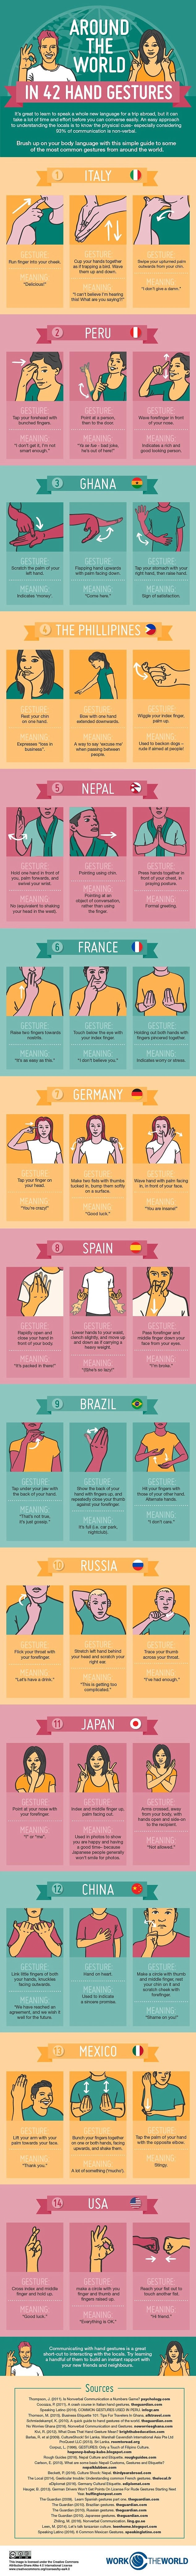 Hand gestures every traveller should know